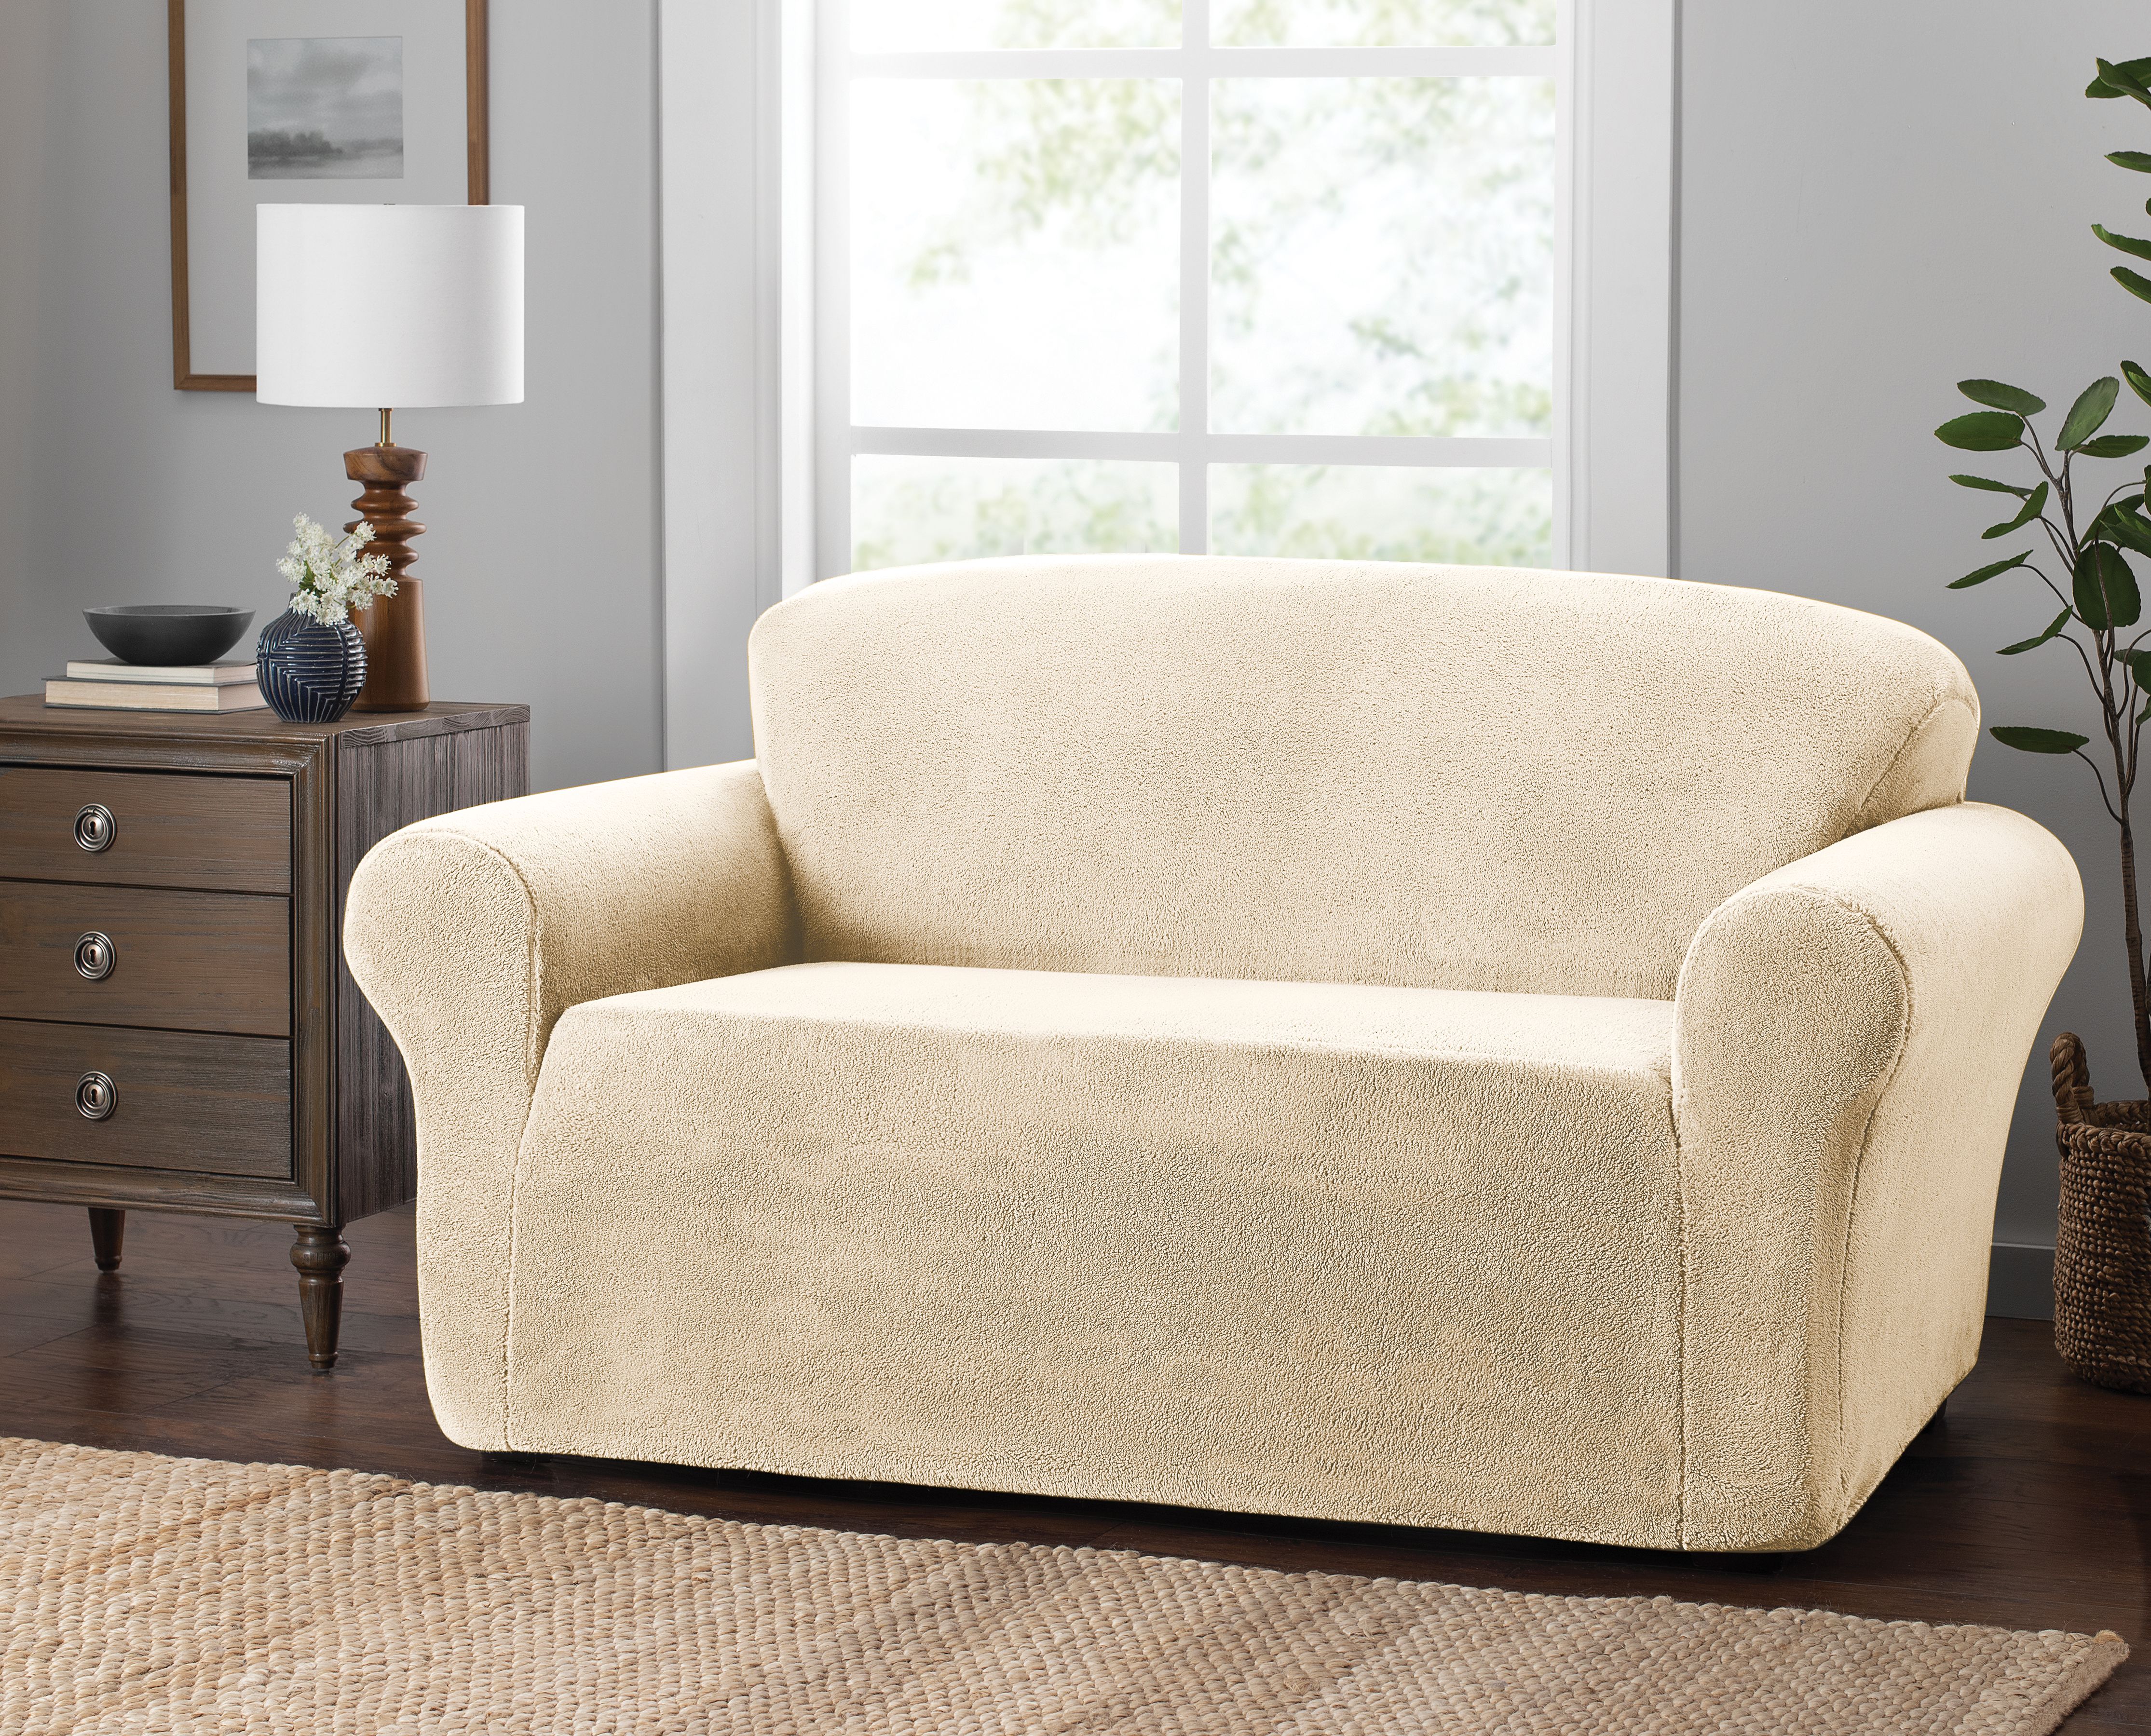 Stretch Sensations Stretch Sherpa 1-Piece Loveseat Furniture Slipcover, Natural - image 1 of 3